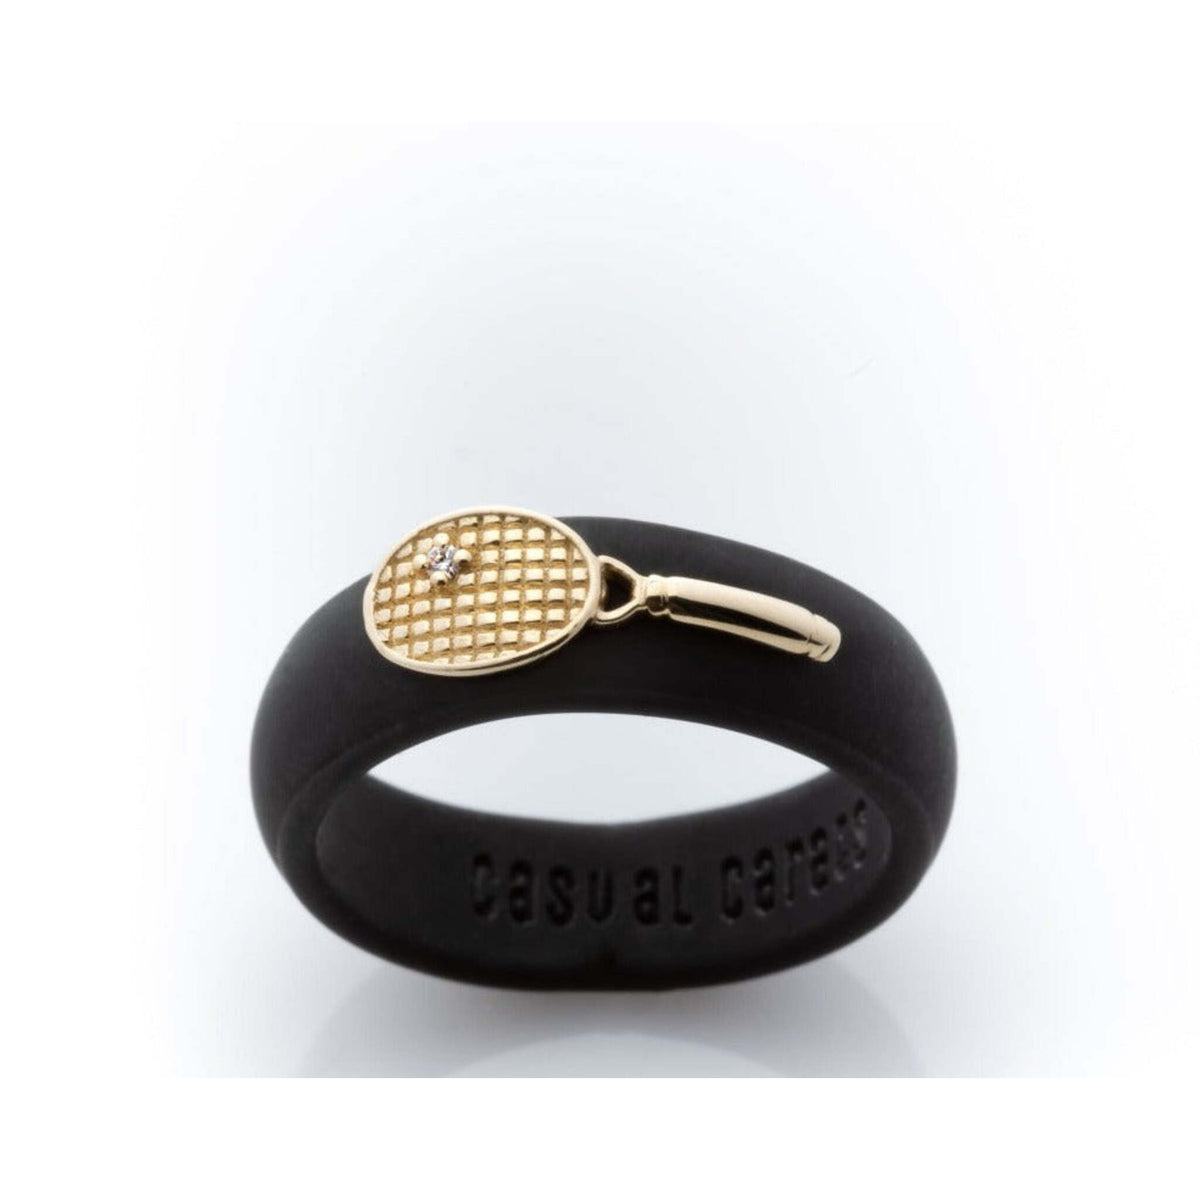 Casual Carats - Sporting Collection - 14K Yellow Gold Diamond Tennis Racket Silicone Ring / Available in a Variety of Silicone Band Colors